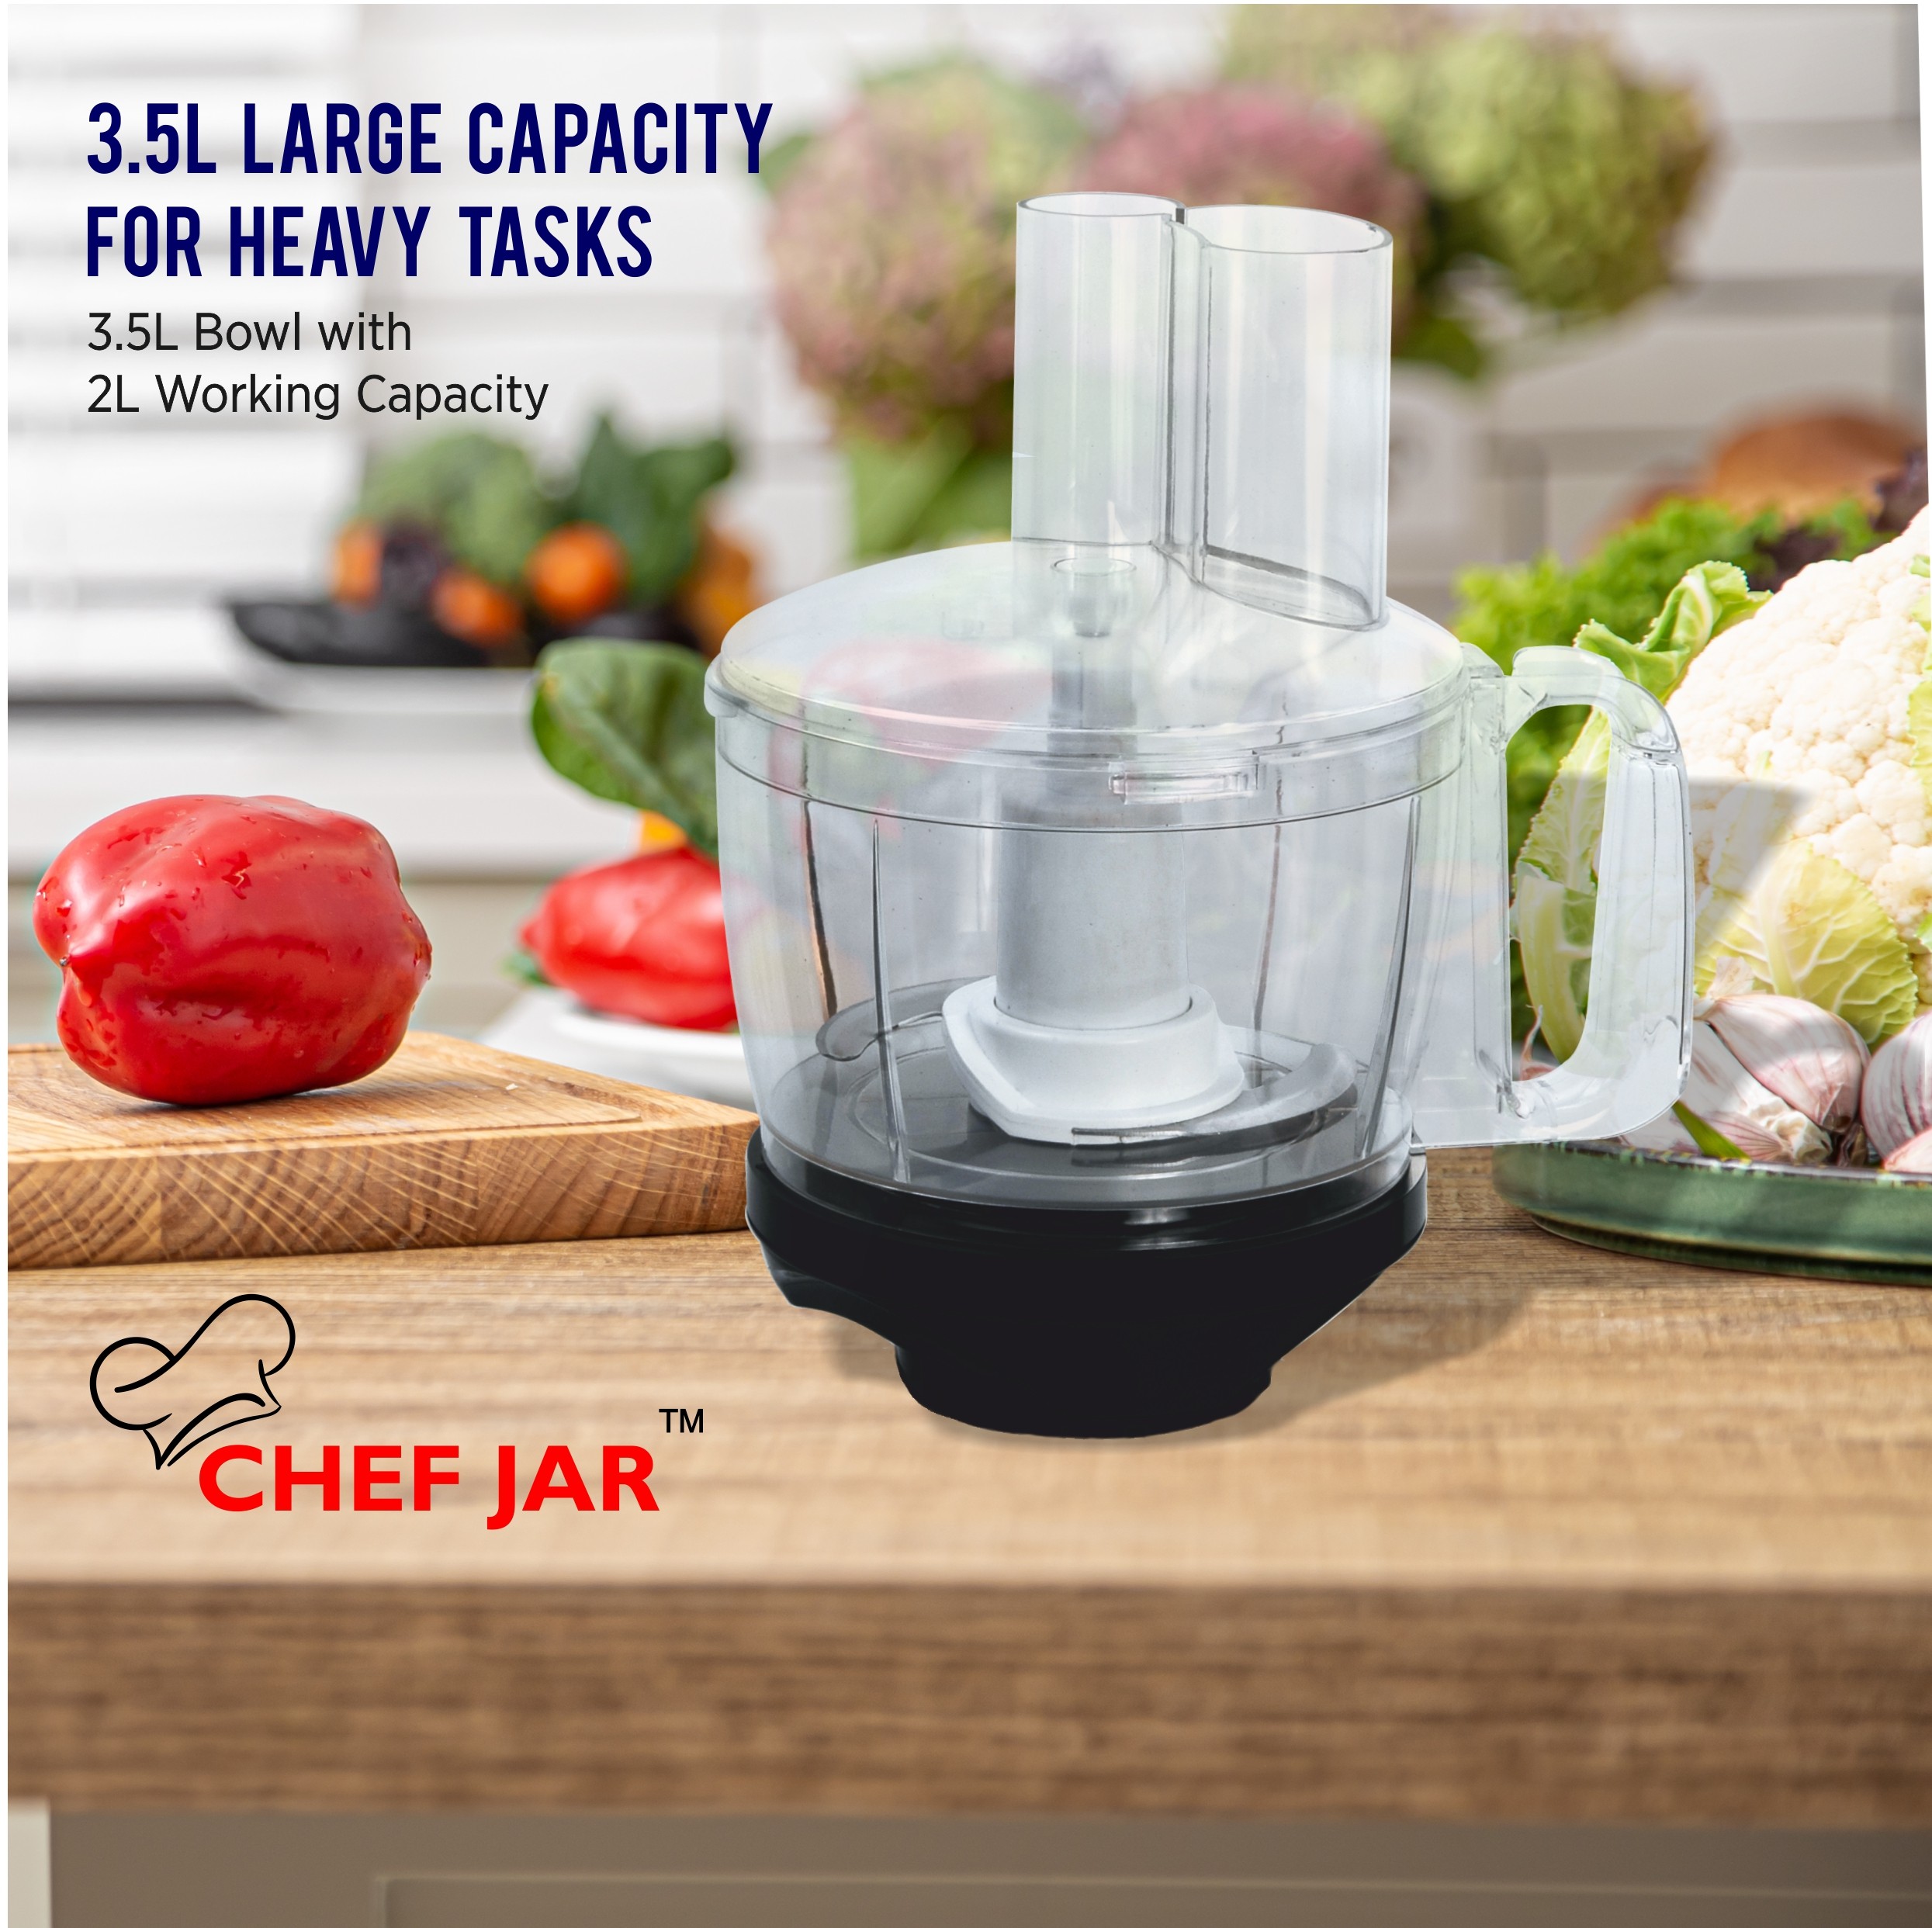 bajaj-bravo-plus-500w-indian-mixer-grinder-with-special-chef-jar-stainless-steel-jars-indian-mixer-grinder-spice-coffee-grinder-110v-for-use-in-canada-usa11